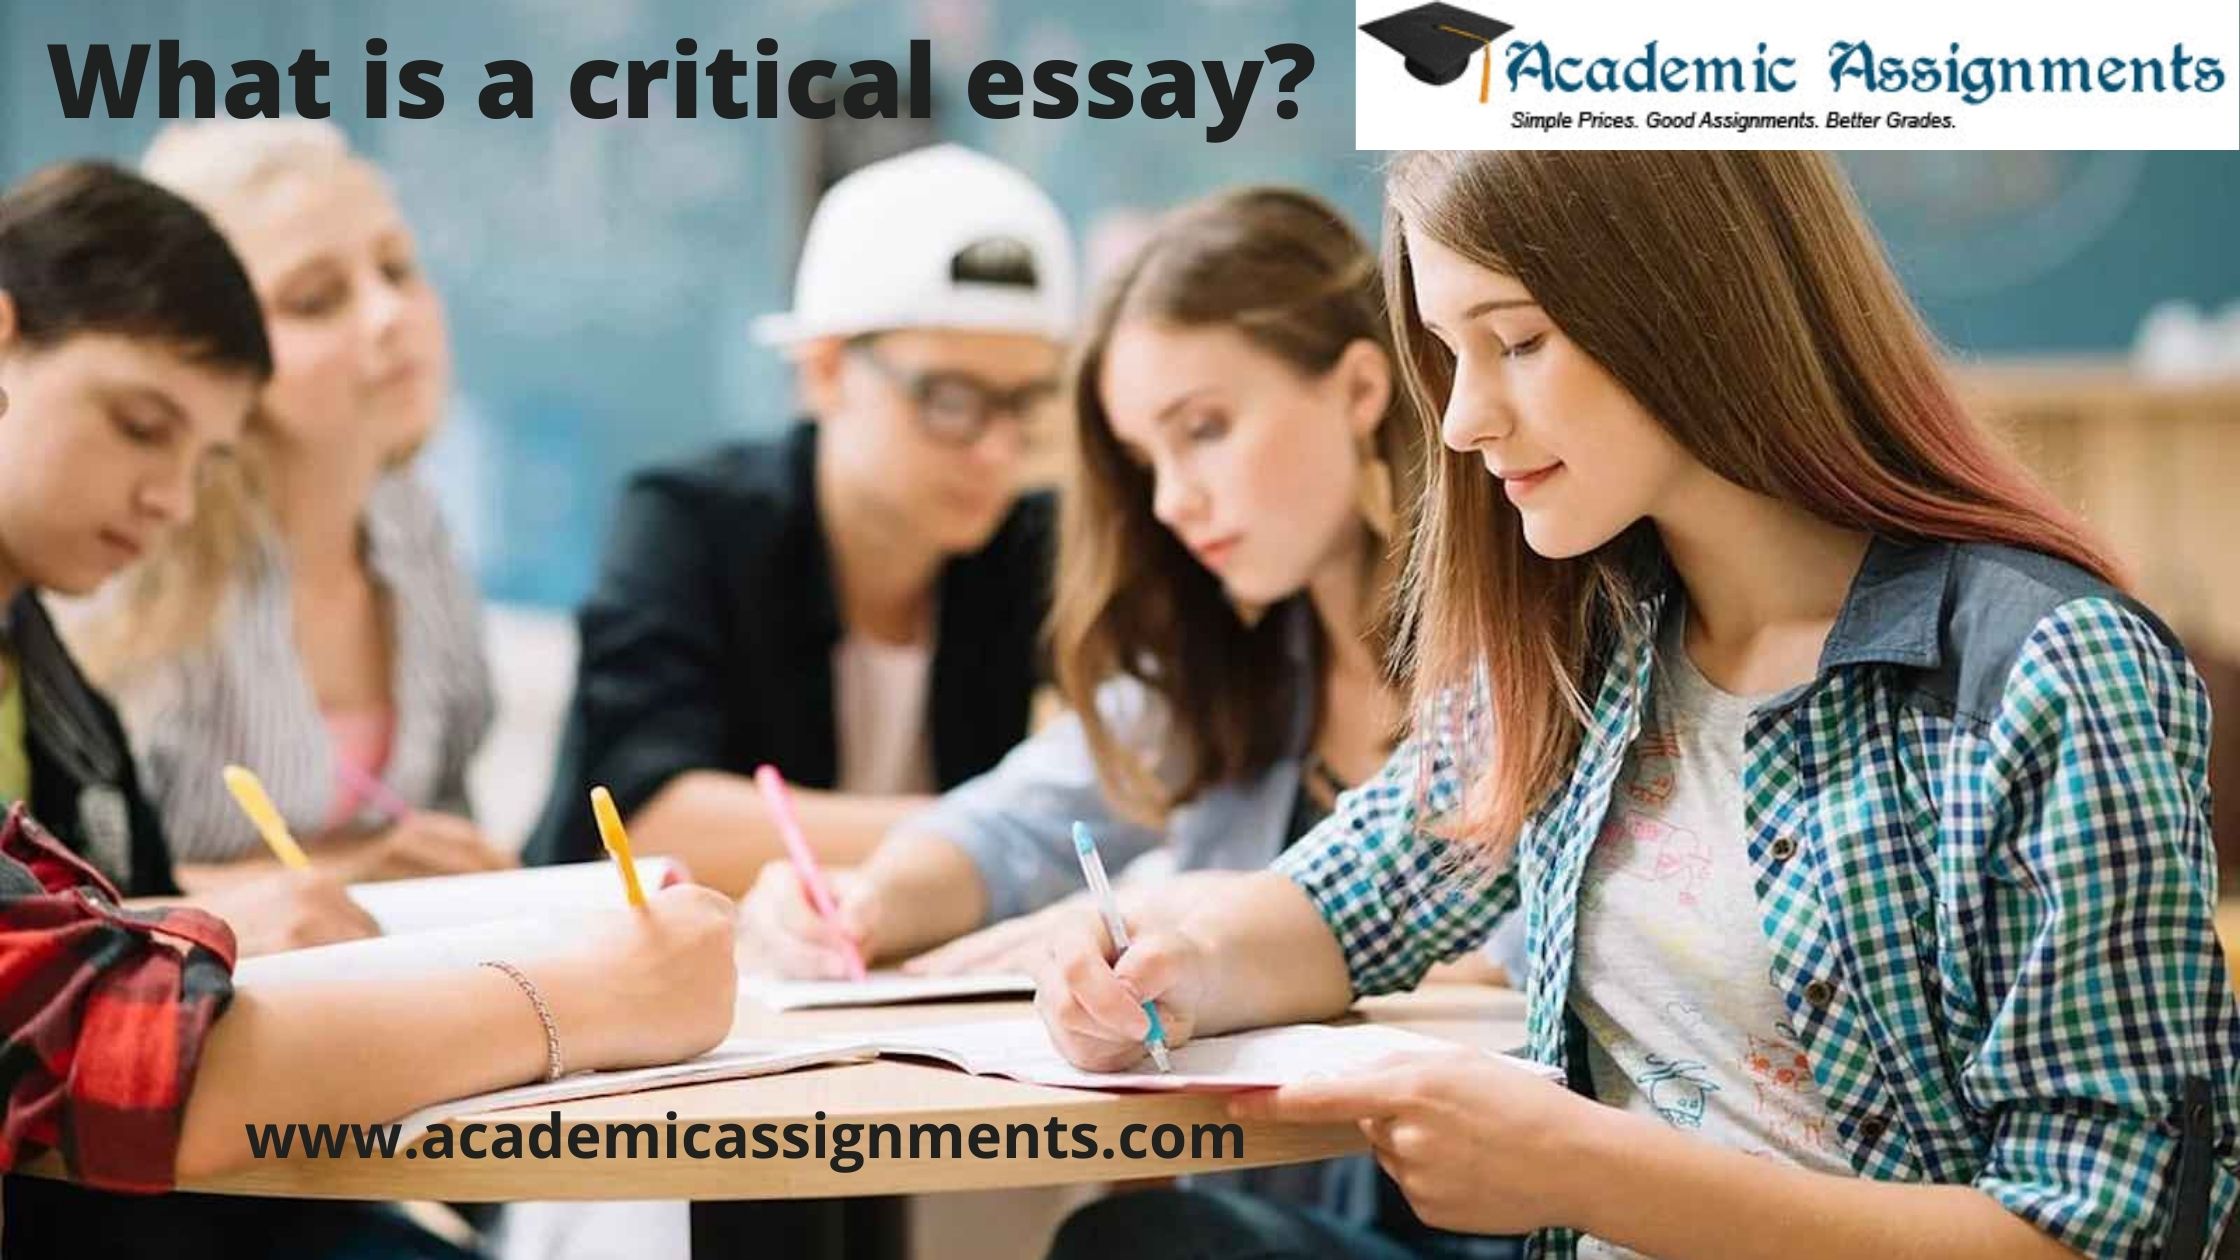 What is a critical essay